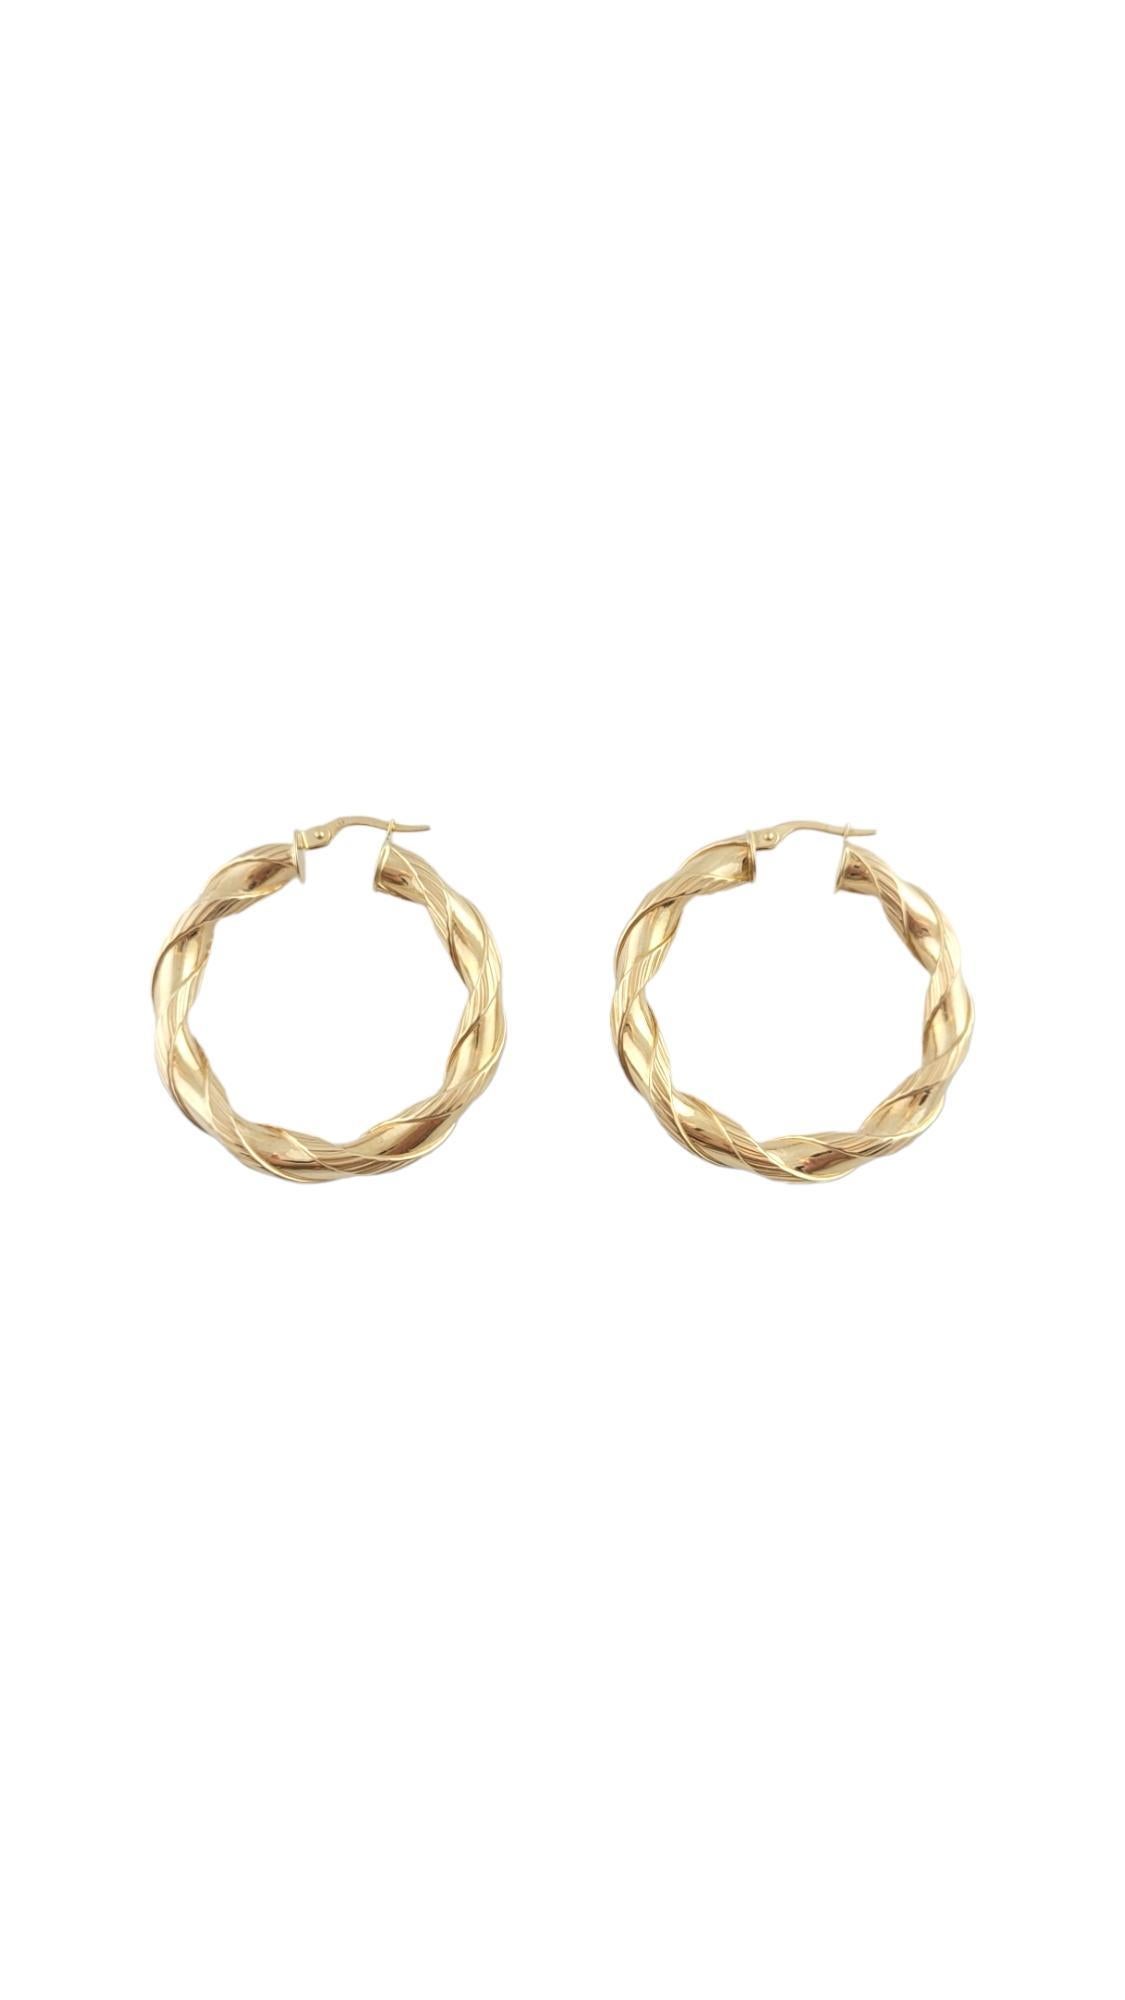 Vintage 14K Yellow Gold Twist Hoop Earrings

Twist design hoop earrings in 14 karat yellow gold.

Hallmark: M 14K Italy

Weight: 4.12 g/ 2.65 dwt.

Diameter: 37.59 mm/ 1.47 in.

5.36 mm thick.

Very good condition, professionally polished.

Will